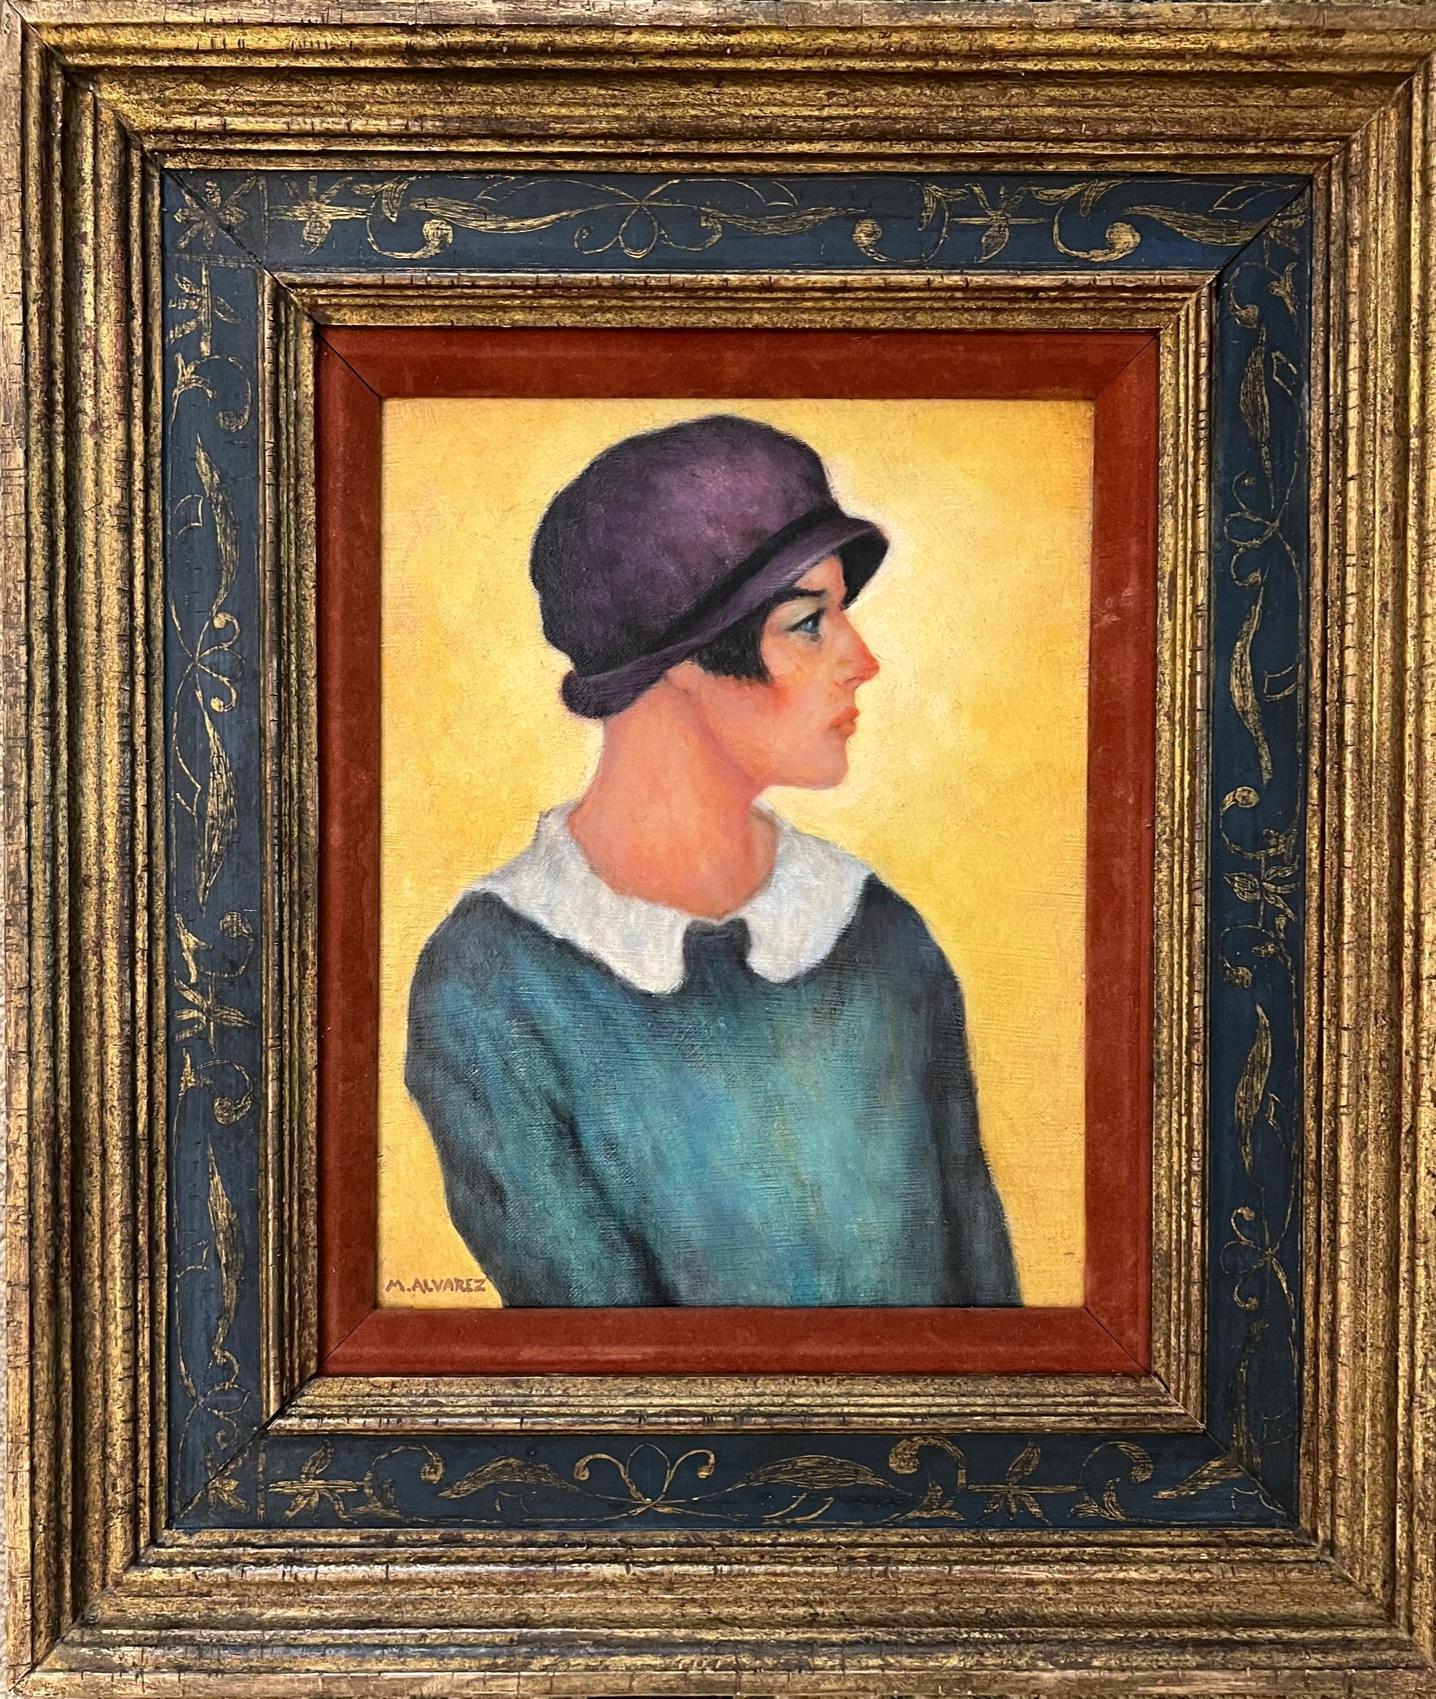 Modern Girl (Untitled) - Painting by Mabel Alvarez